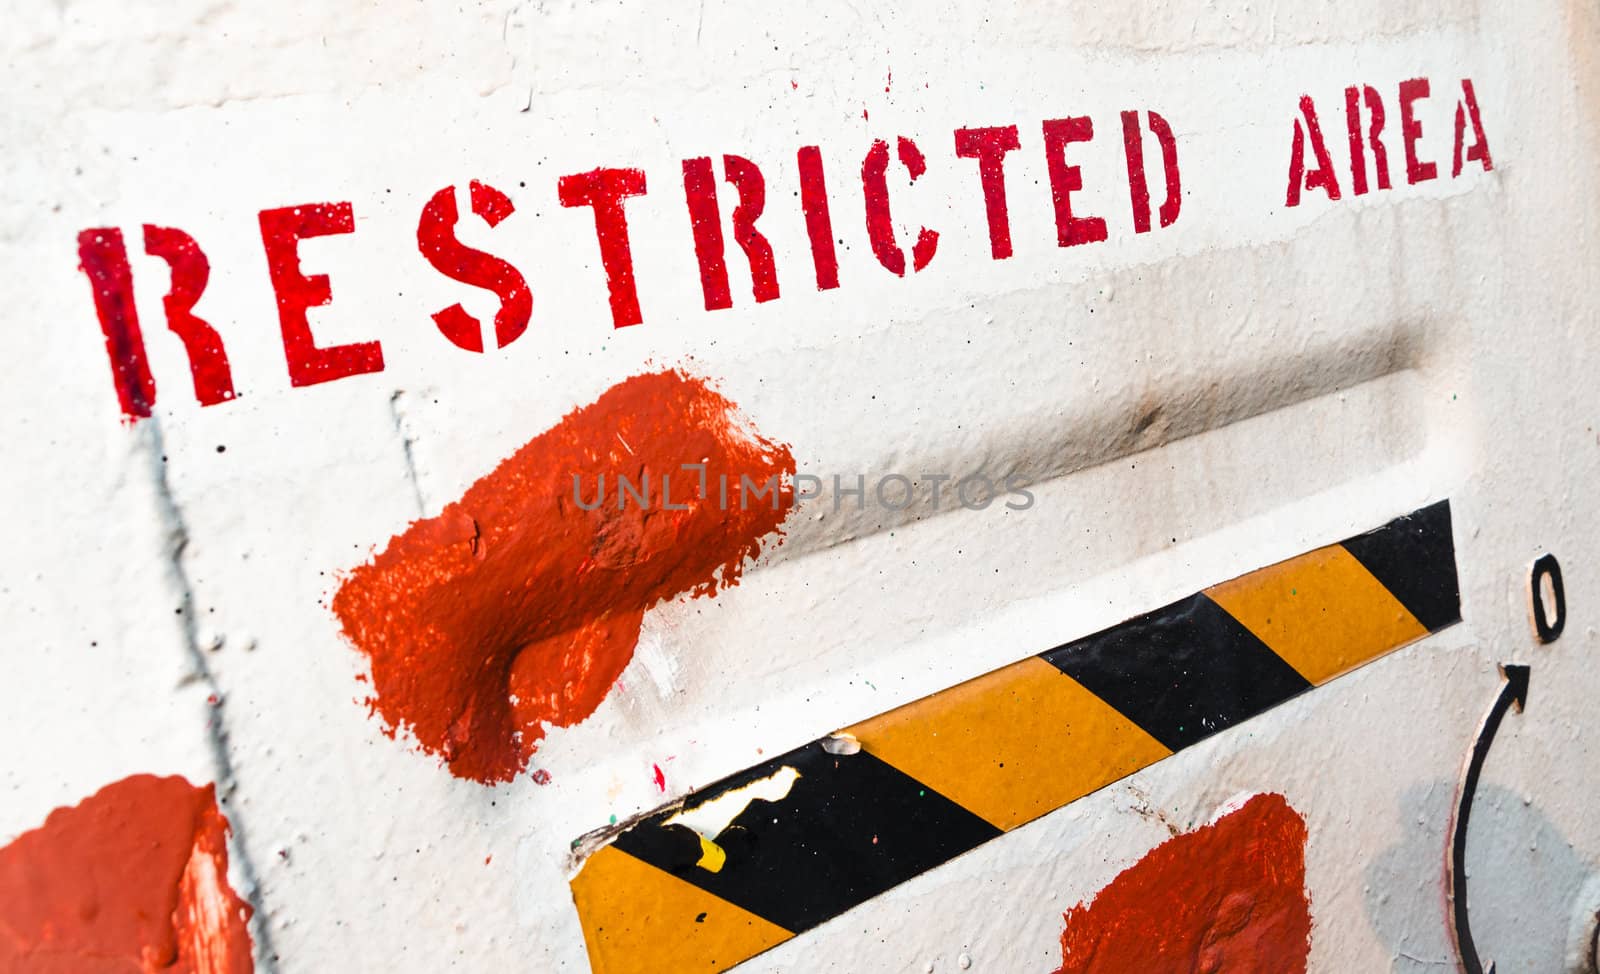 restricted area notice by boydz1980